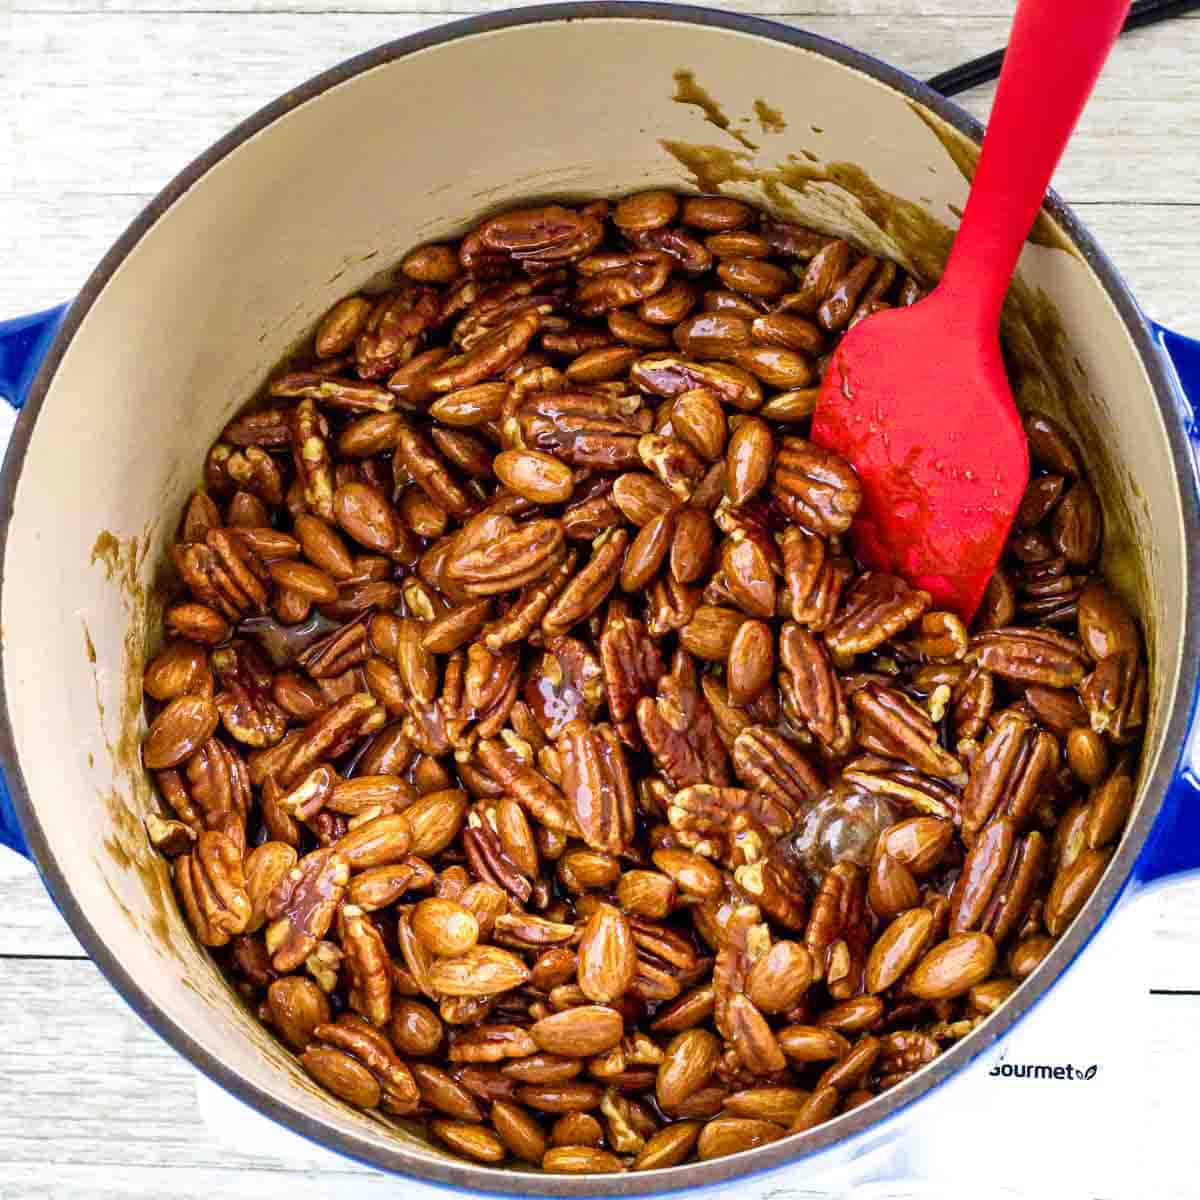 stirring pecans and almonds with a spatula